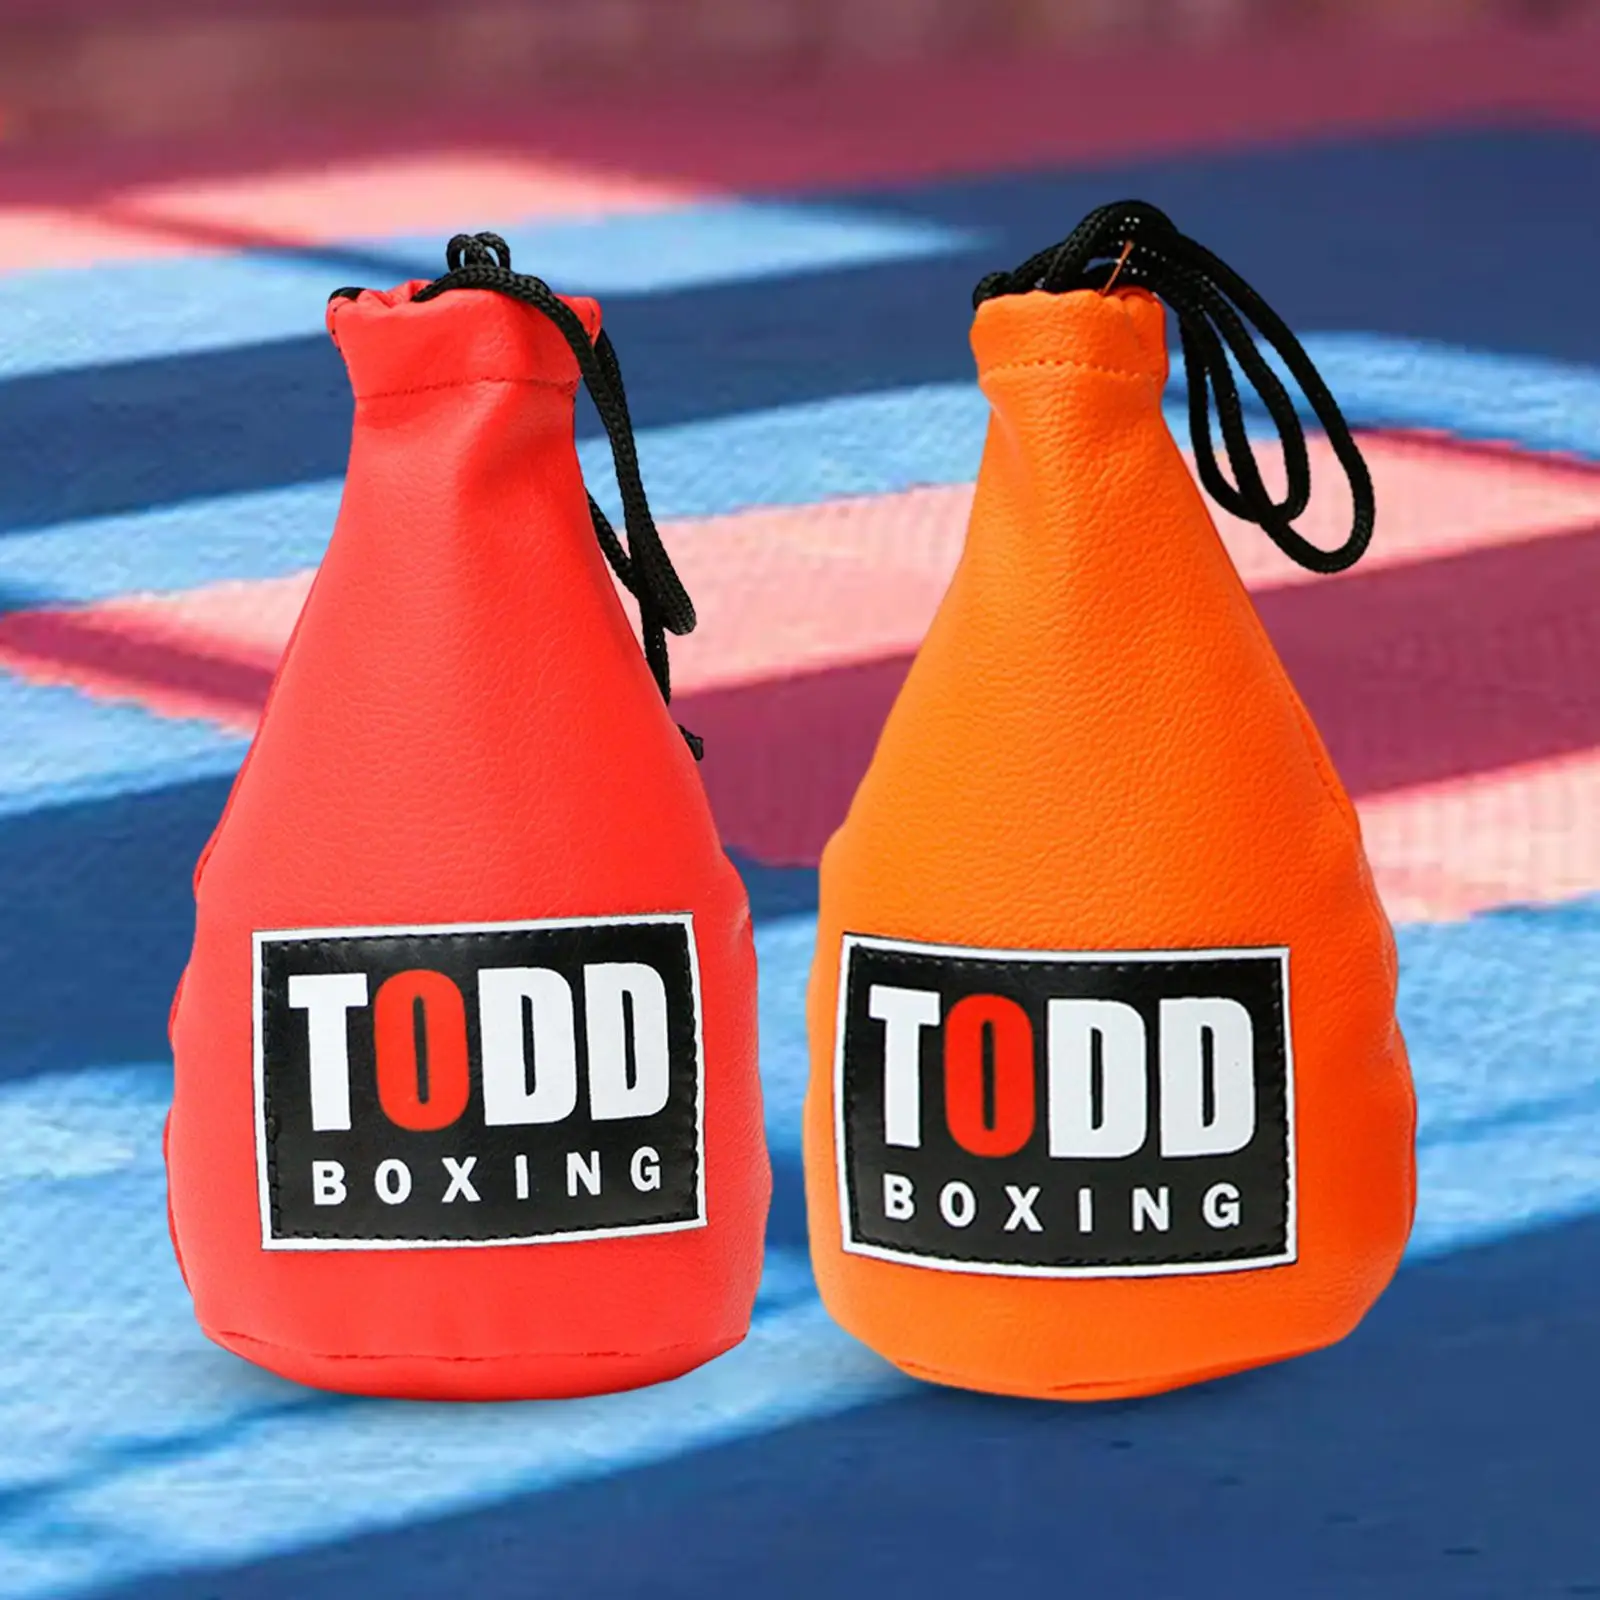 Boxing Dodge Training Bag Gear Adults Boxing Punch Bag for Fight Skill Punching